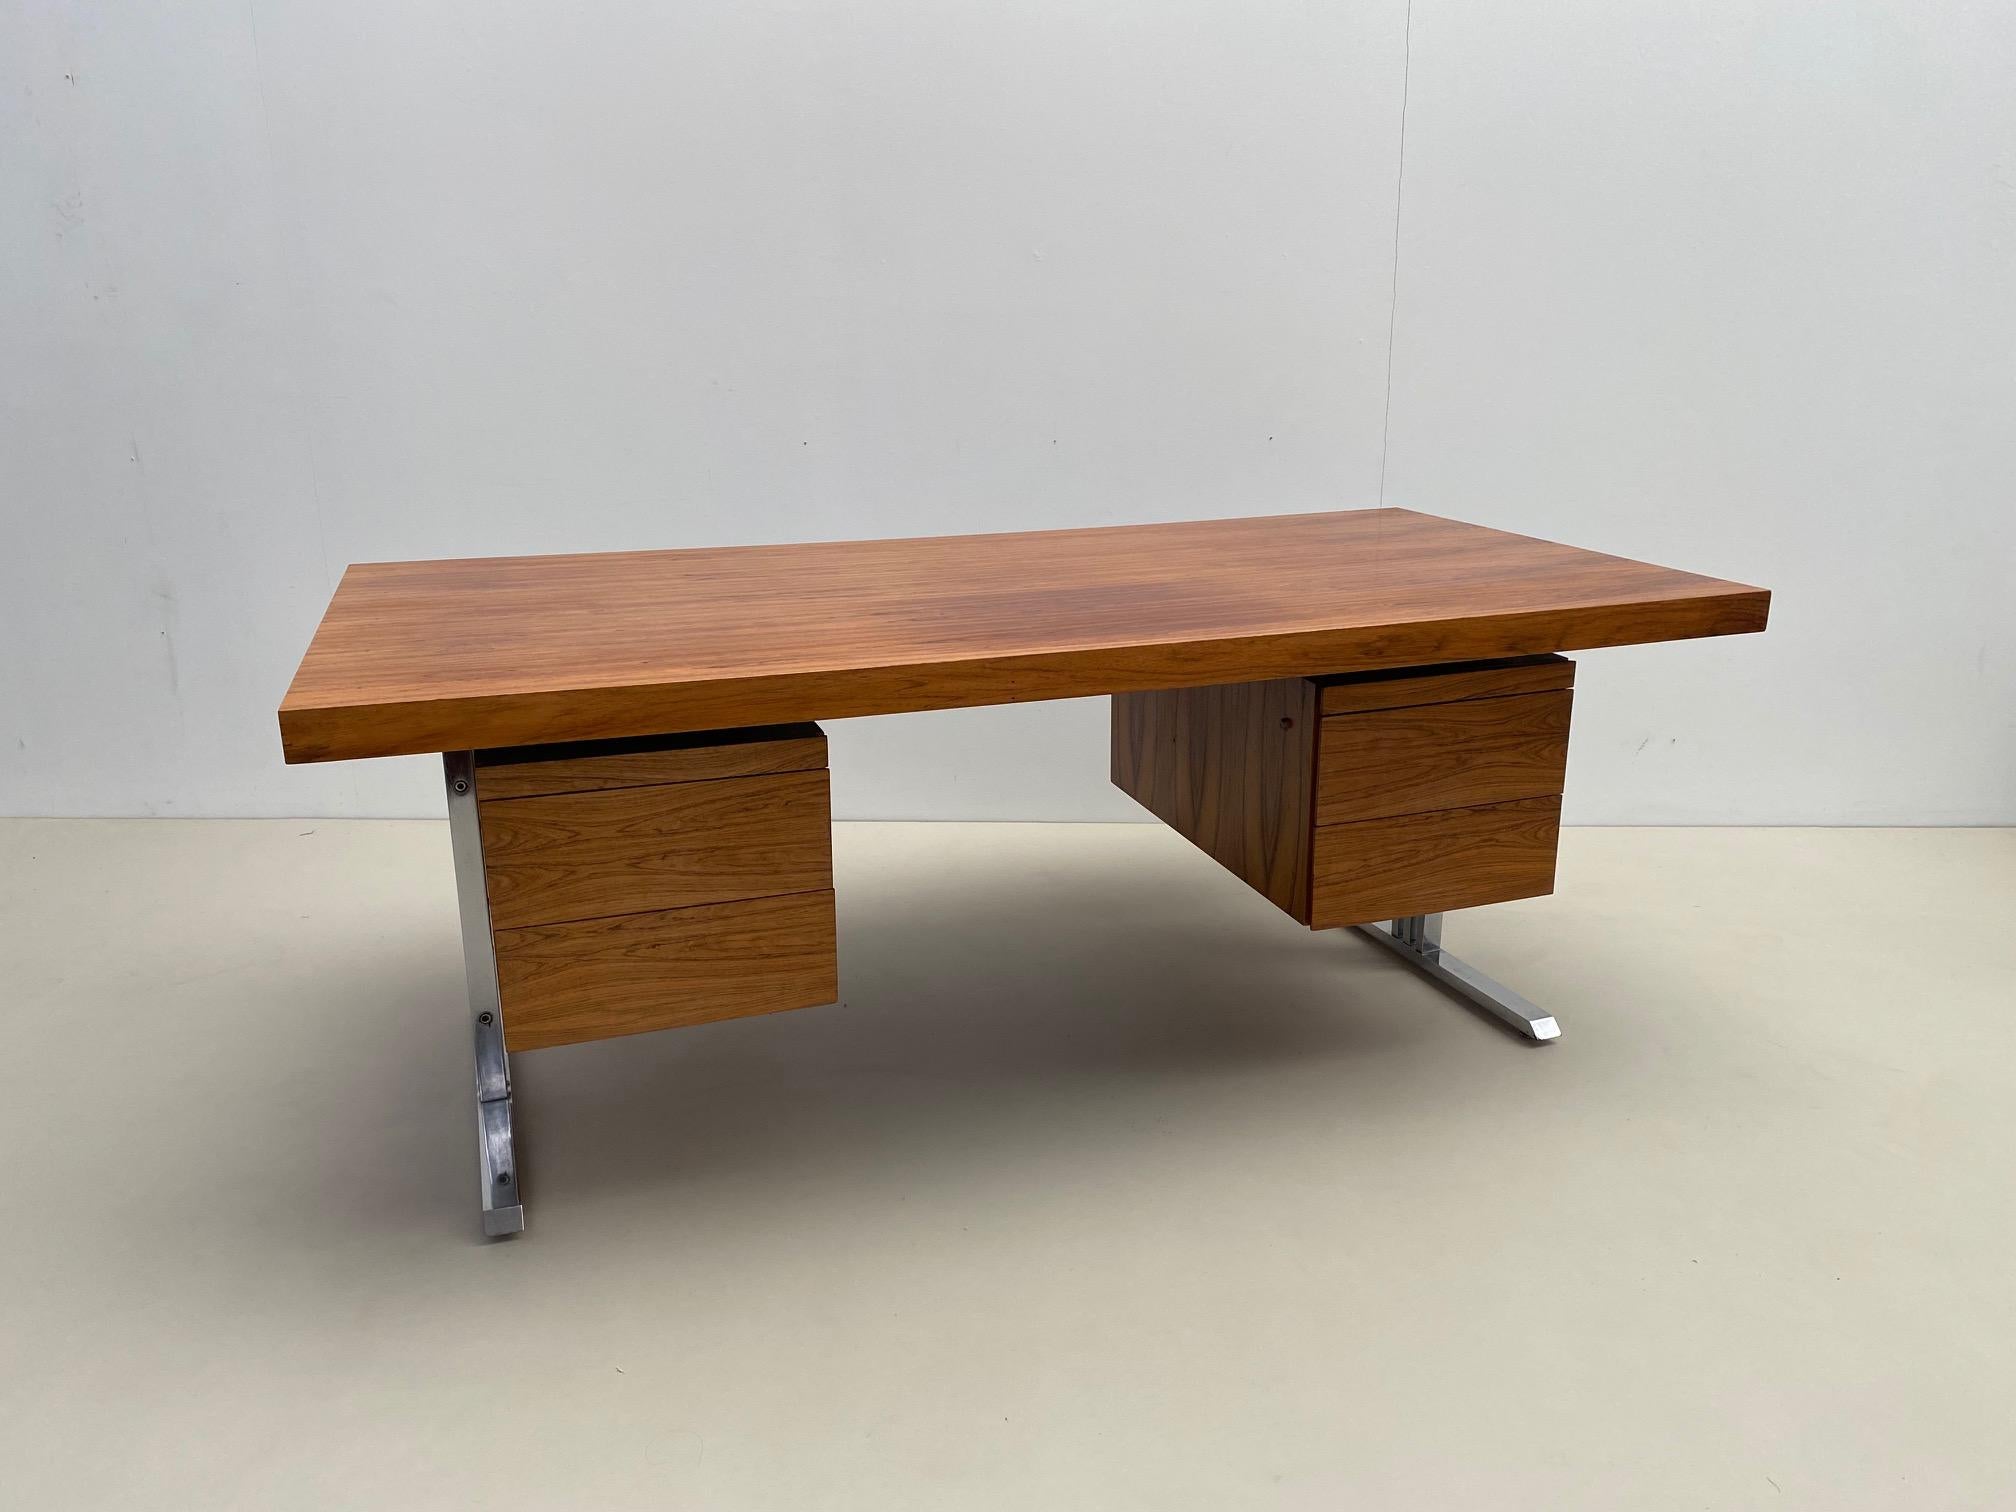 Mid-Century Modern Italian Desk with Drawers , Wood and Chrome, 1970s For Sale 3